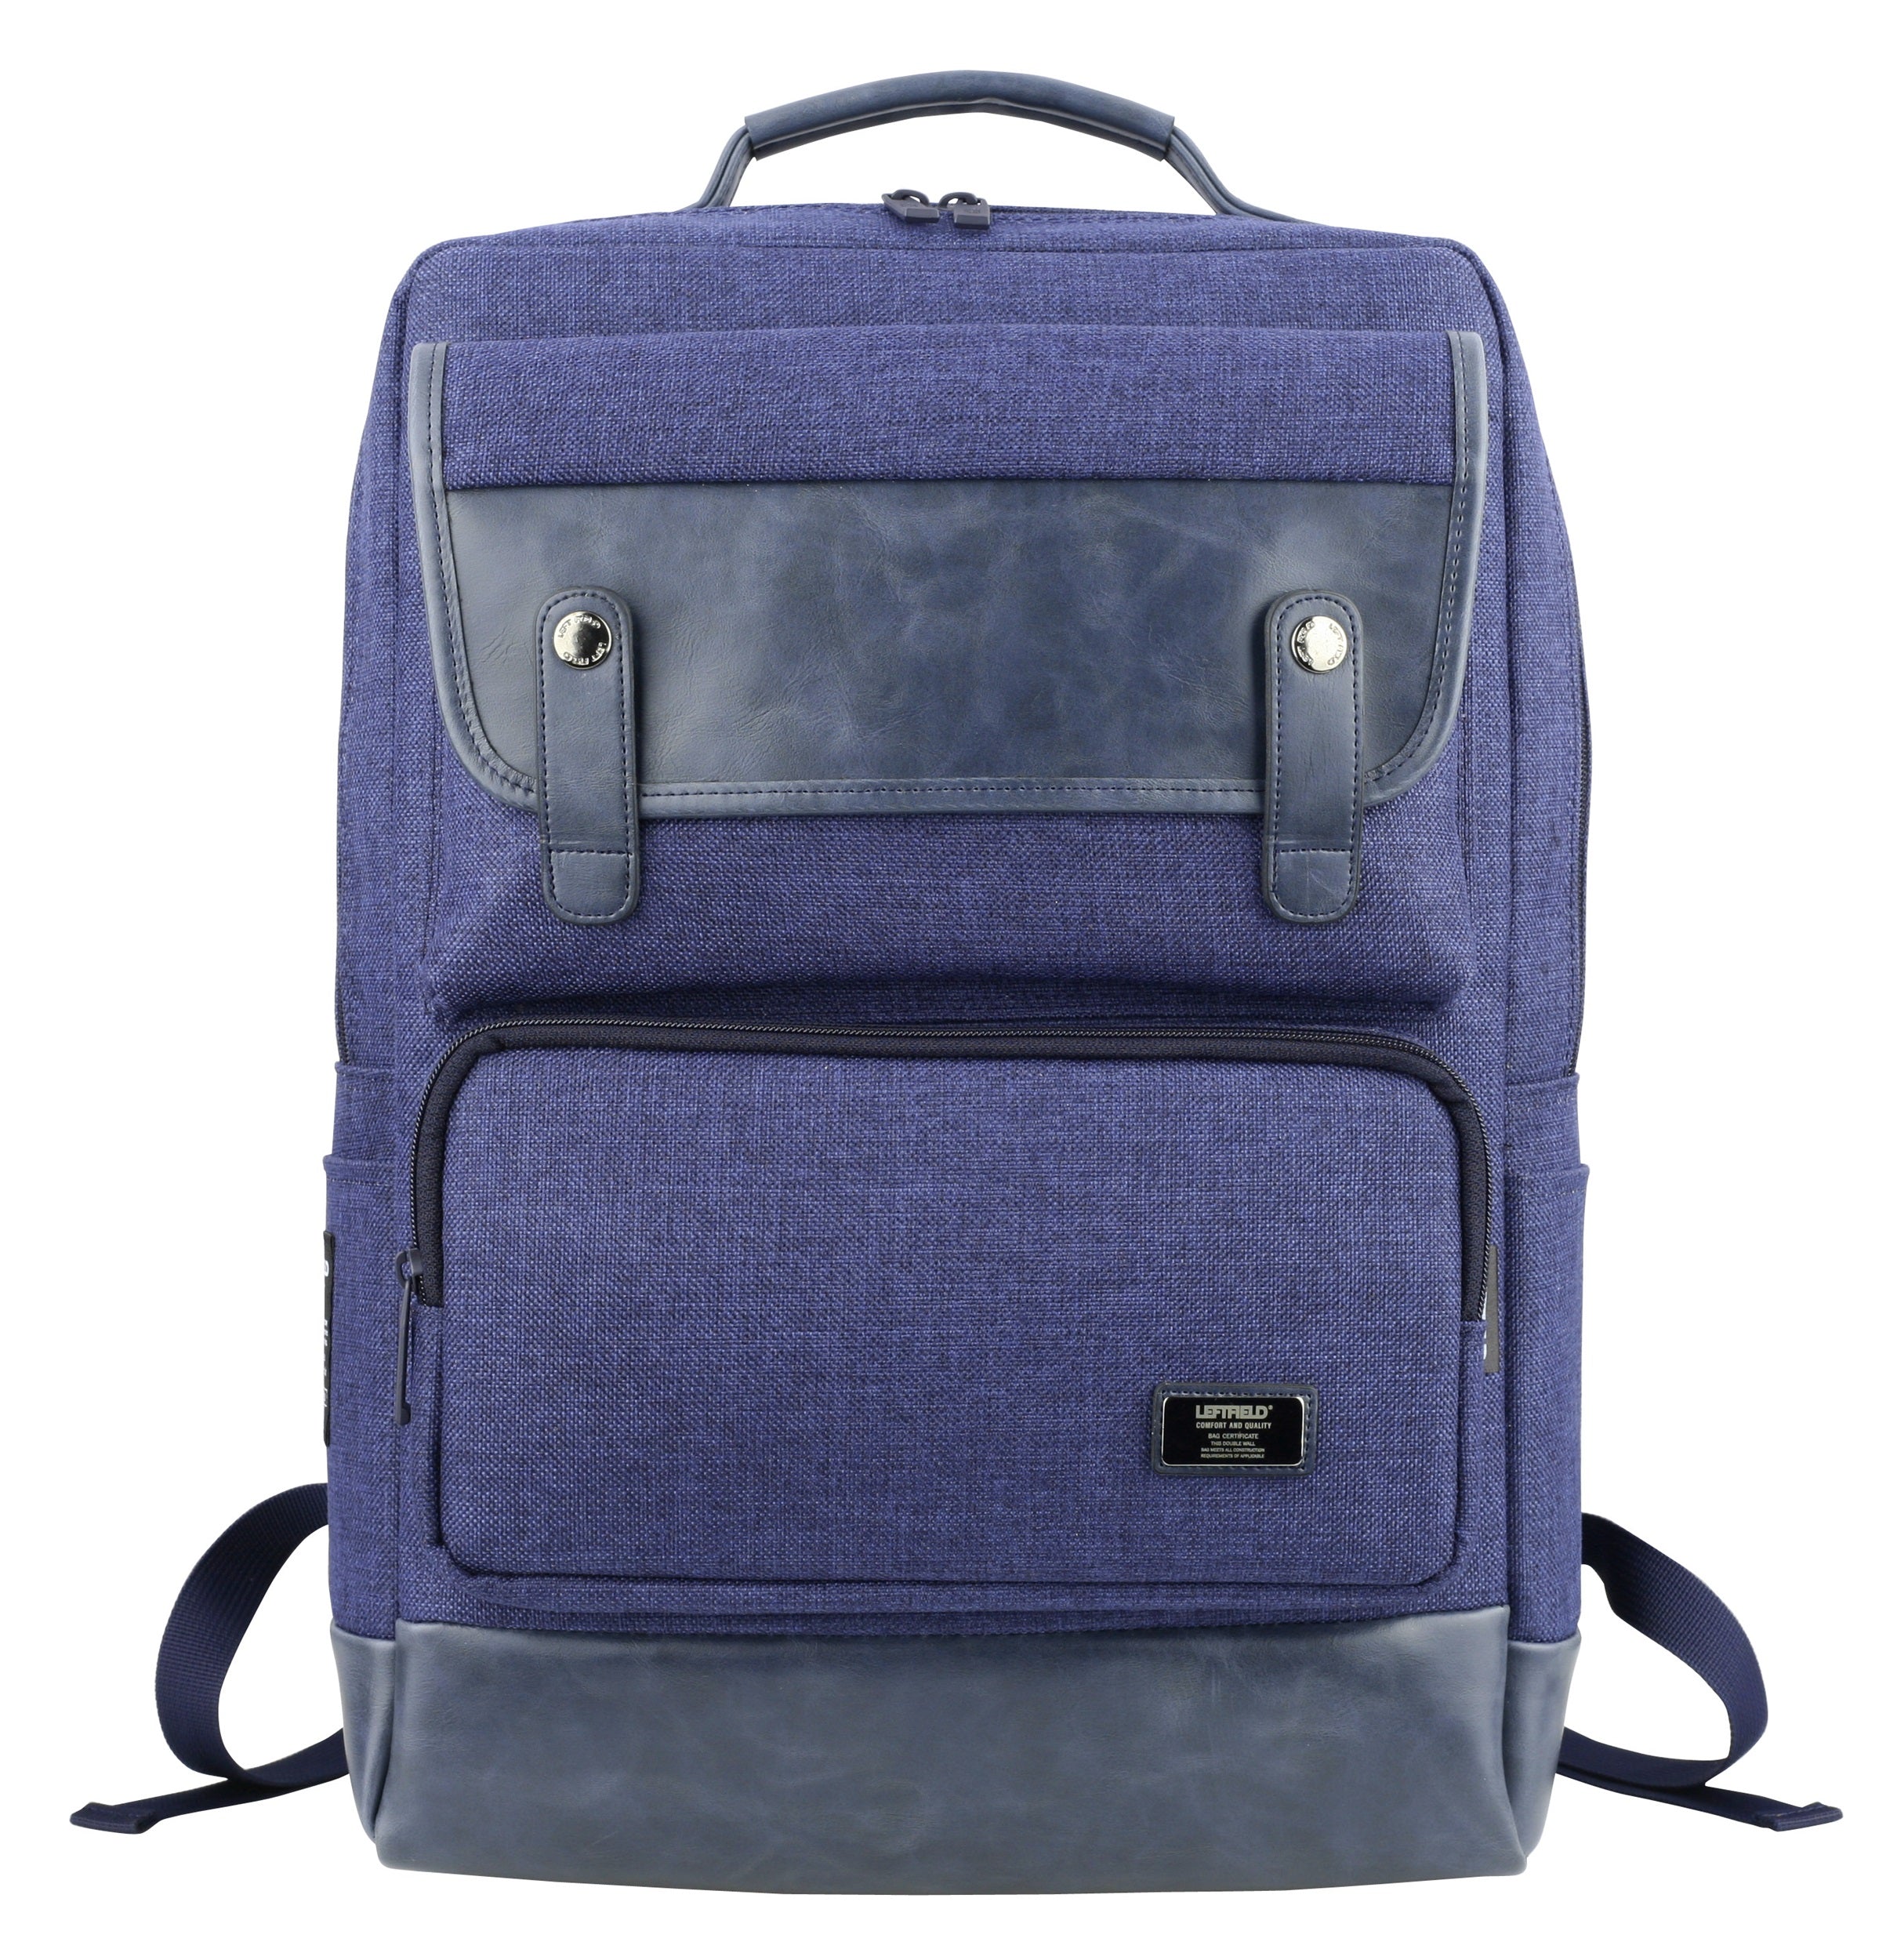 Navy Blue Canvas Faux Leather Paneled Casual Laptop Backpacks